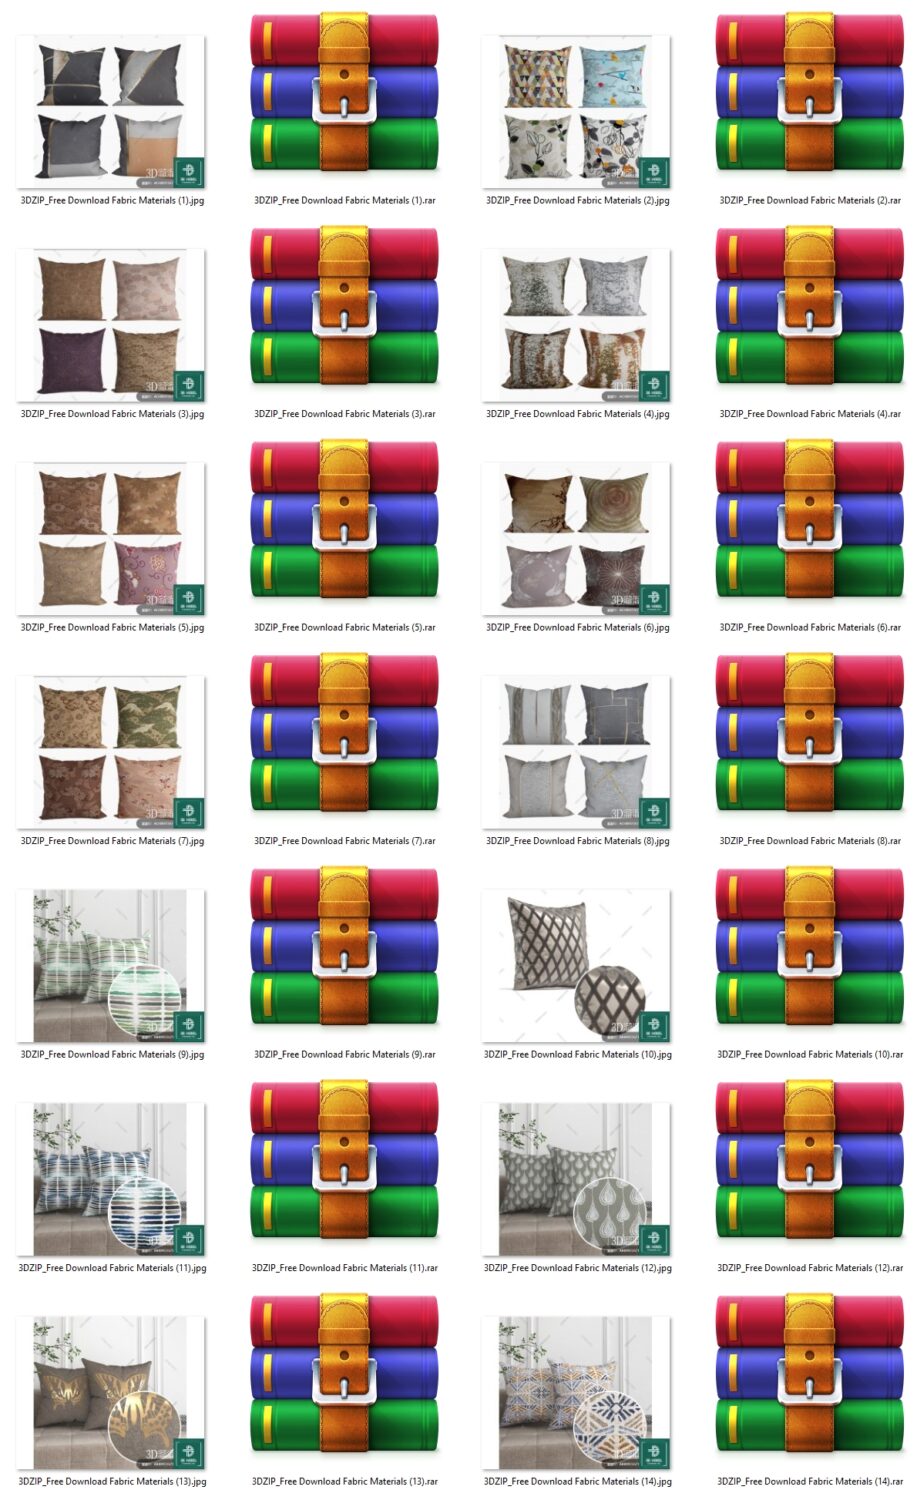 11223. Free Download Fabric Materials